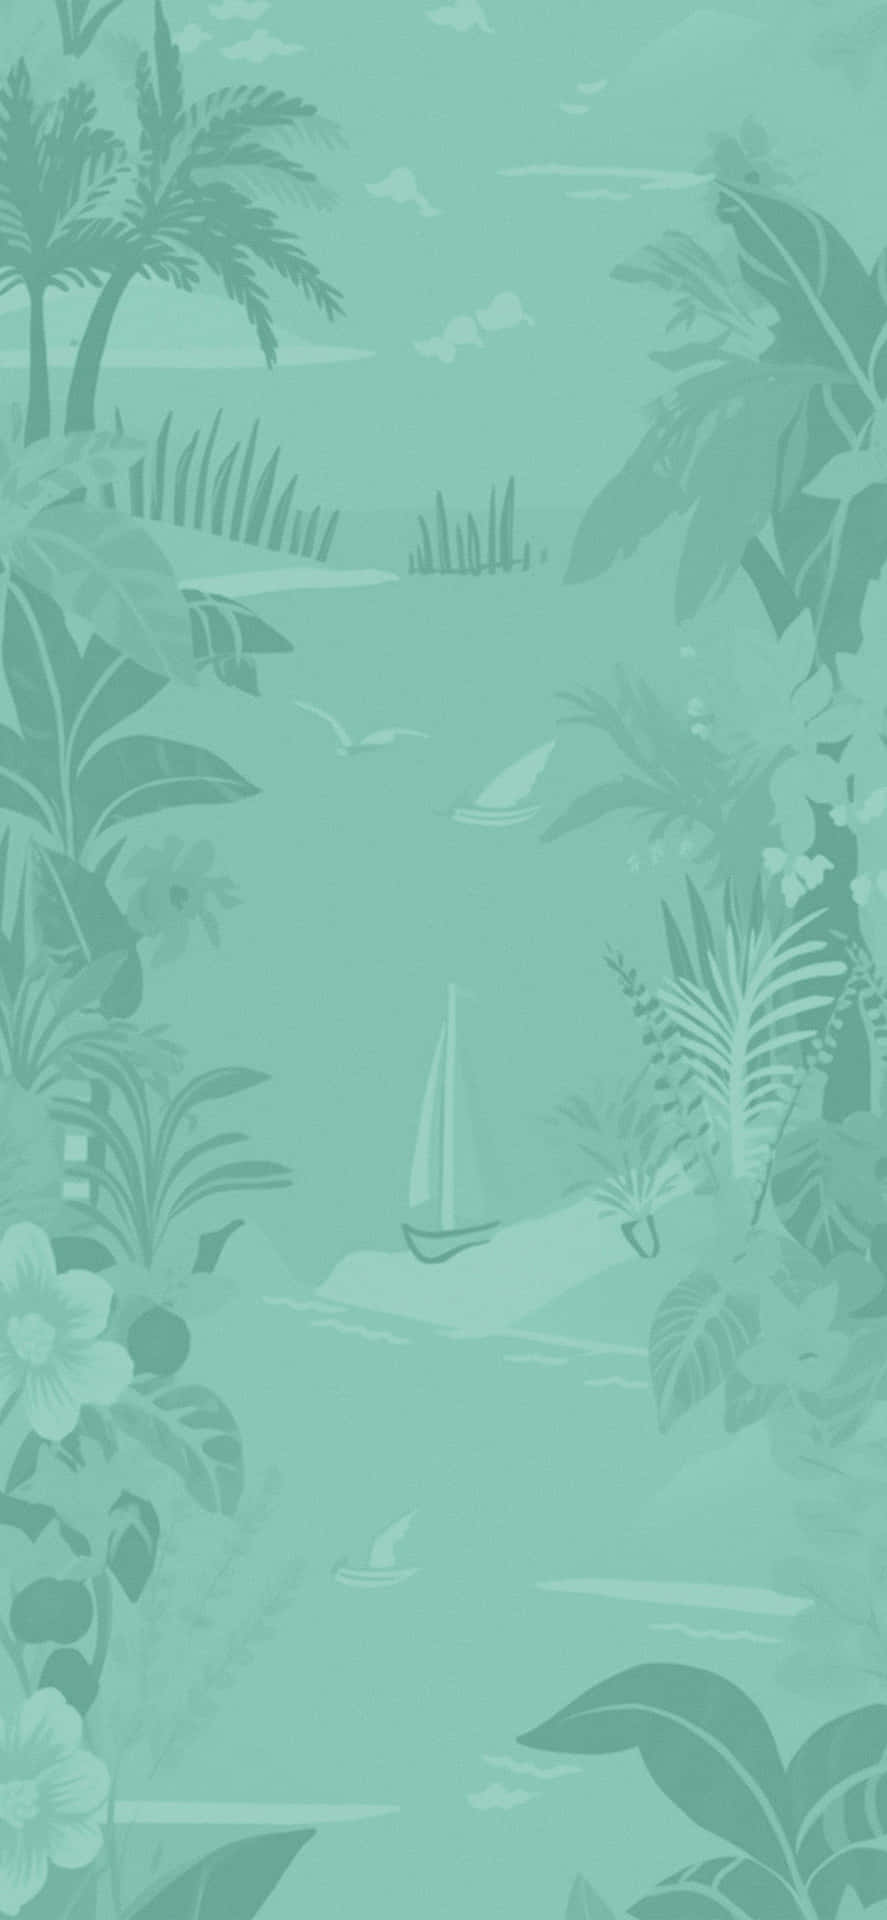 Green Preppy Tropical Background Wallpaper